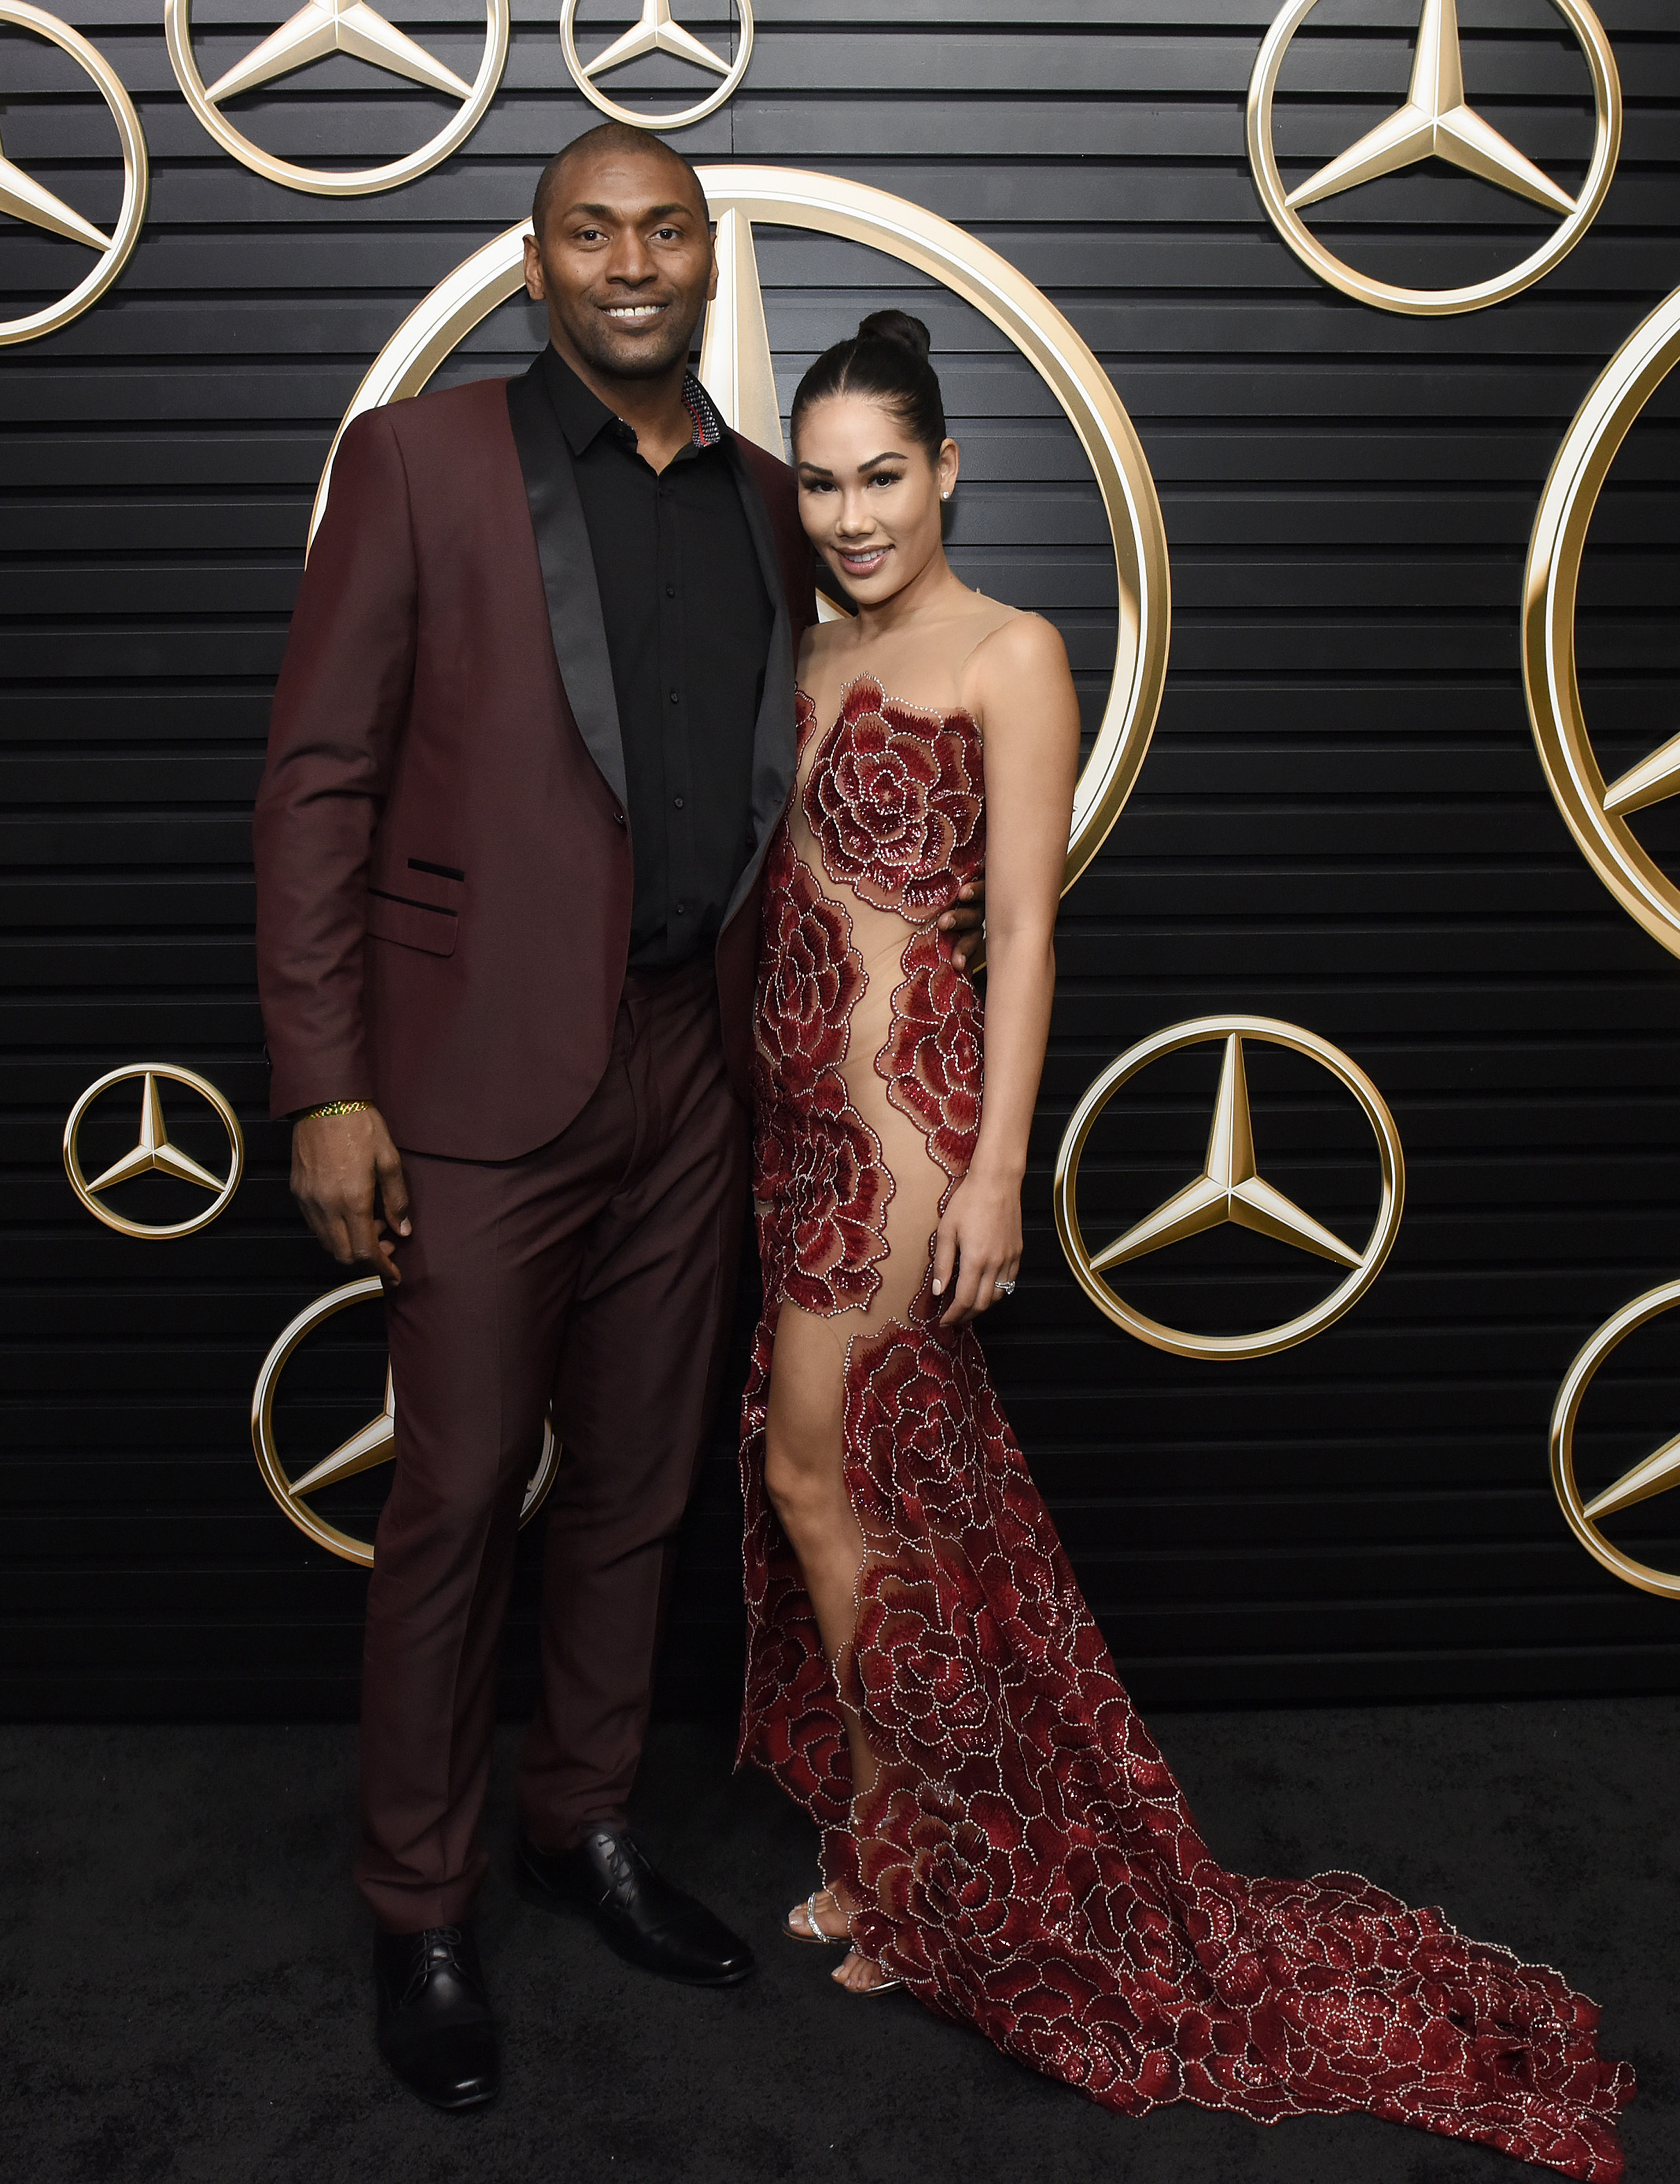 Metta World Peace and Maya Sandiford Artest attend the Mercedes-Benz Academy Awards Viewing Party at The Four Seasons Hotel Los Angeles at Beverly Hills on February 9, 2020, in Los Angeles, California. | Source: Getty Images